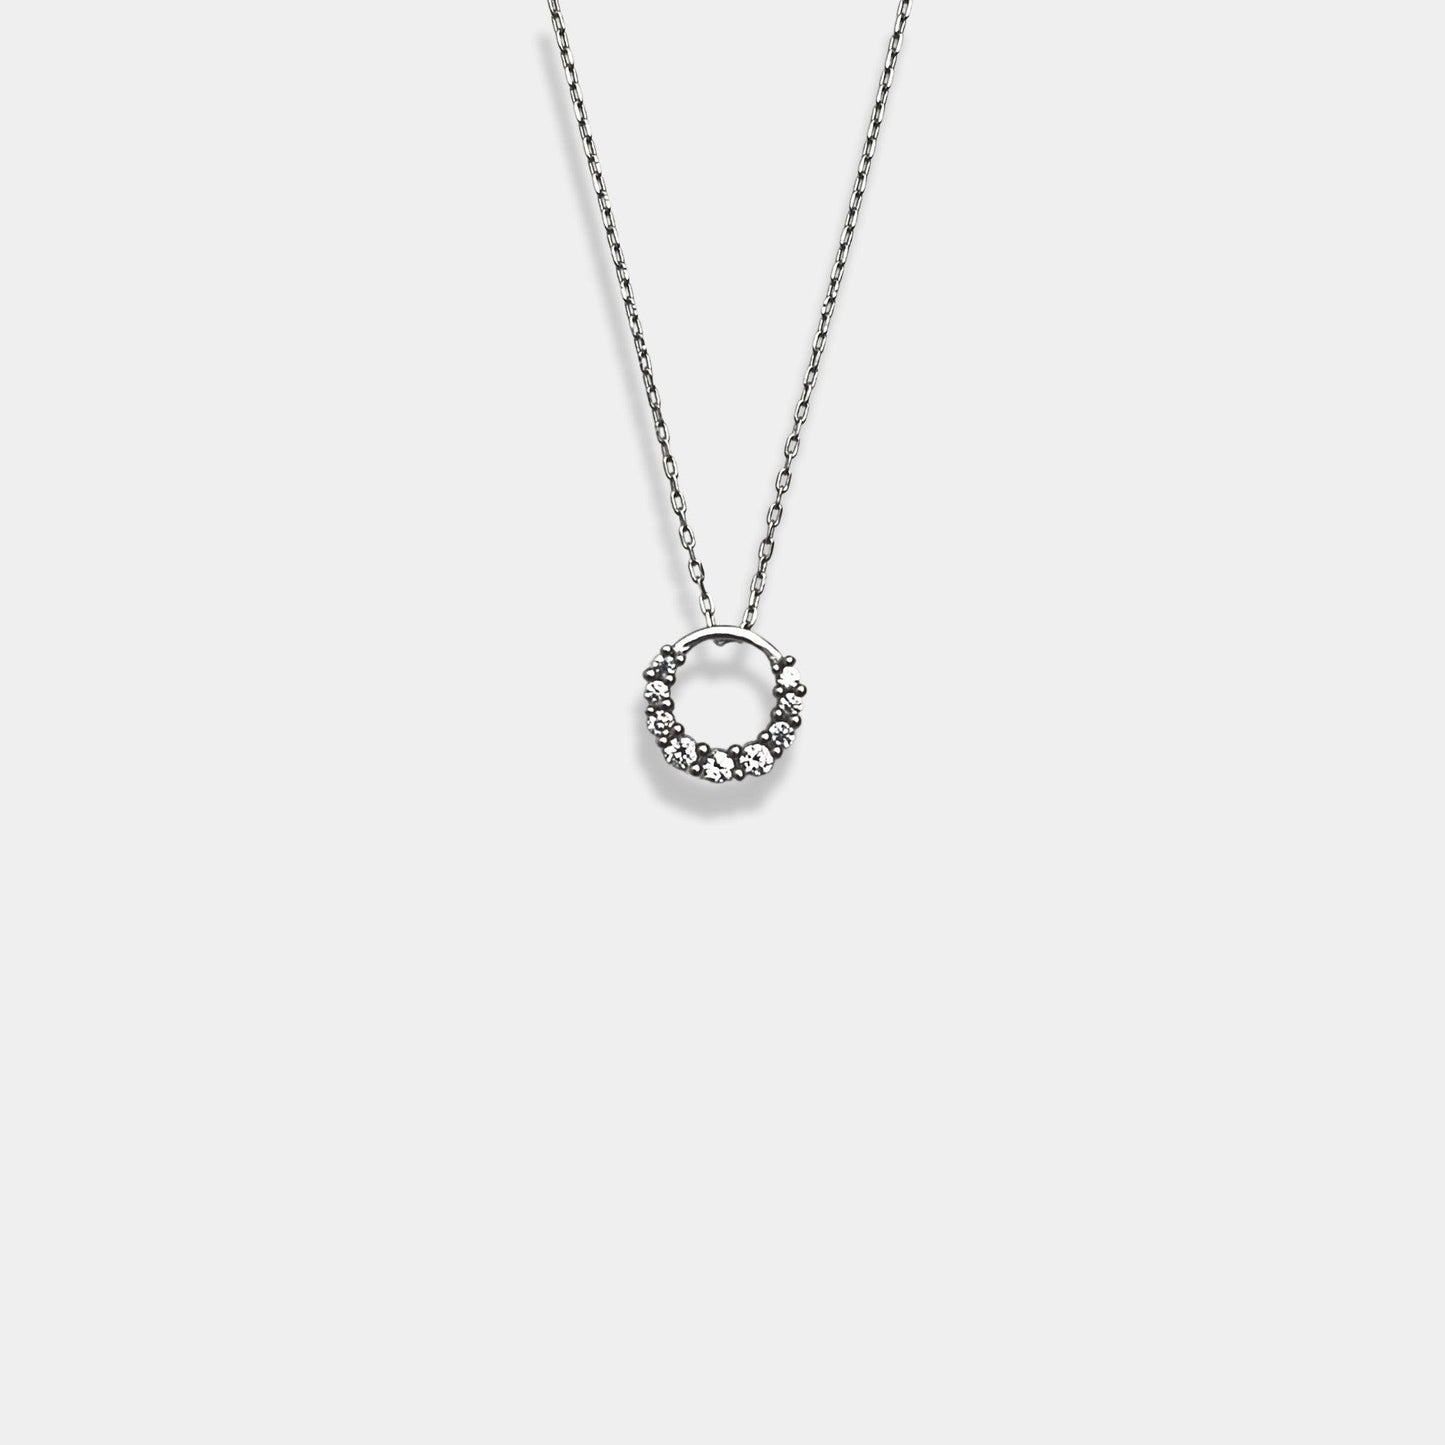 Discover elegance at its finest with our sterling silver necklace, adorned with a circle pendant that adds a touch of grace to any outfit.